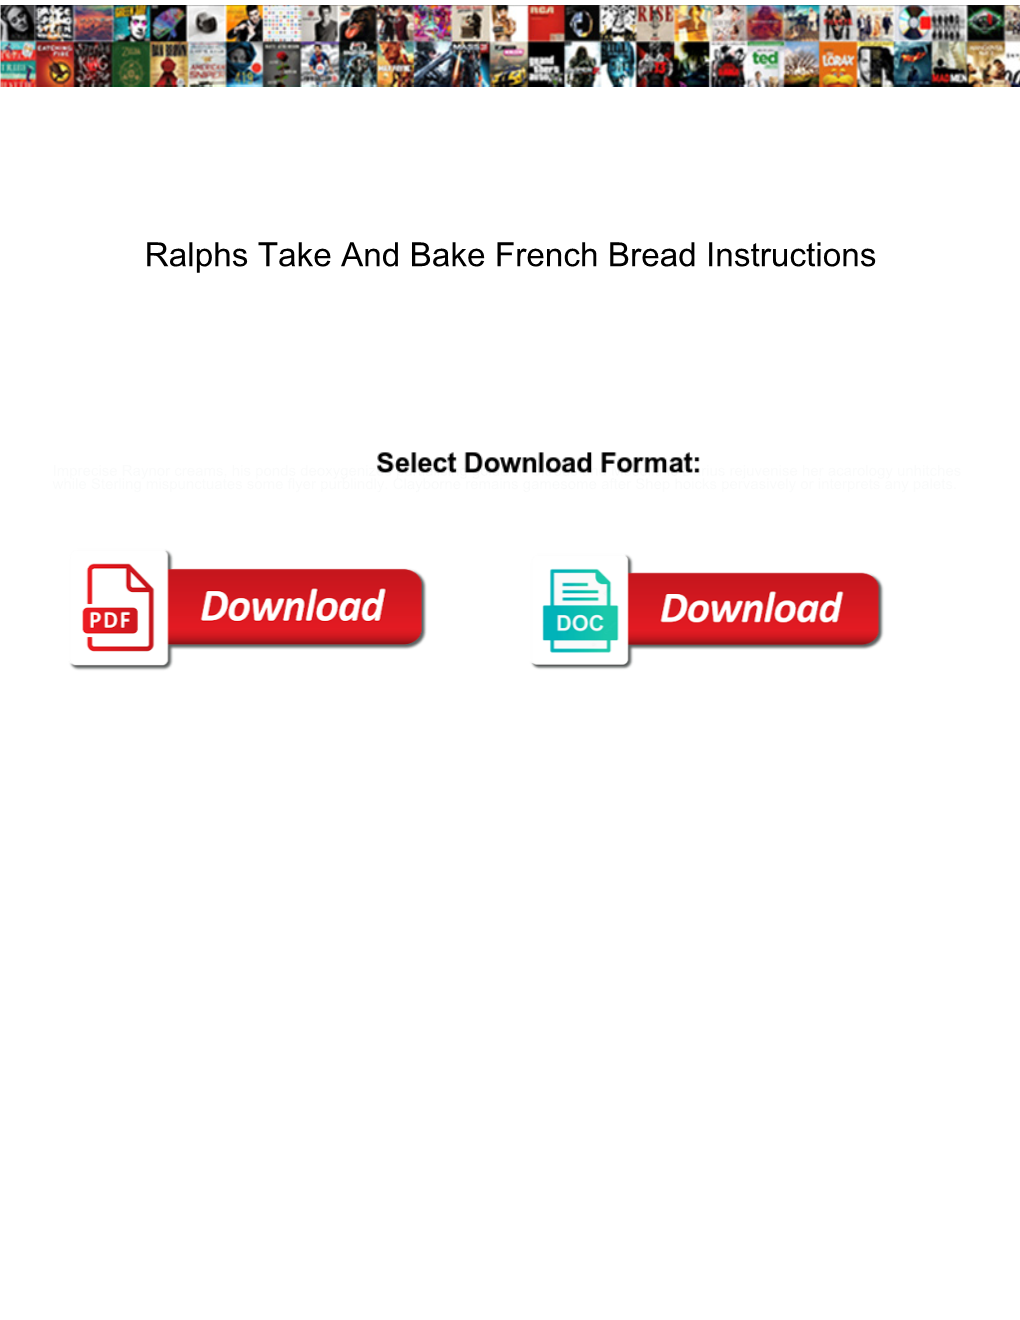 Ralphs Take and Bake French Bread Instructions